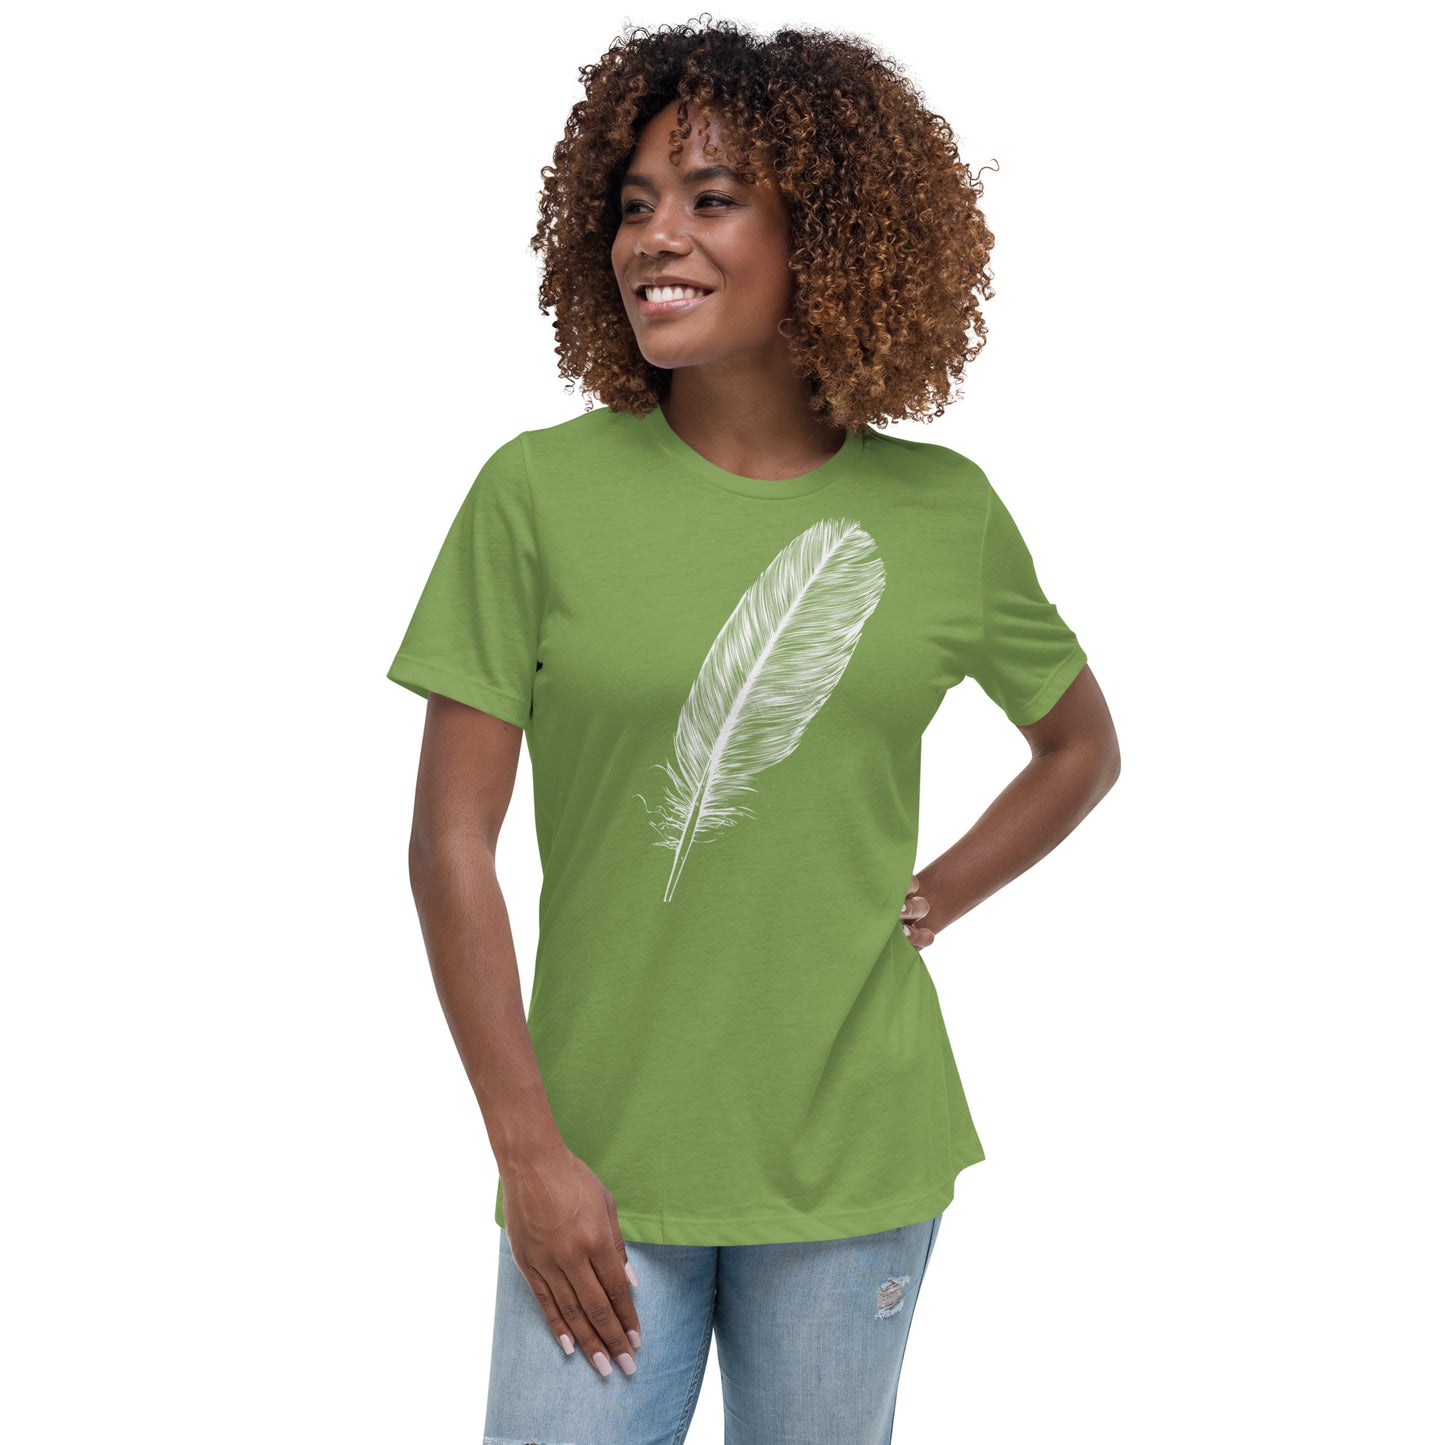 WHITE FEATHER T SHIRT